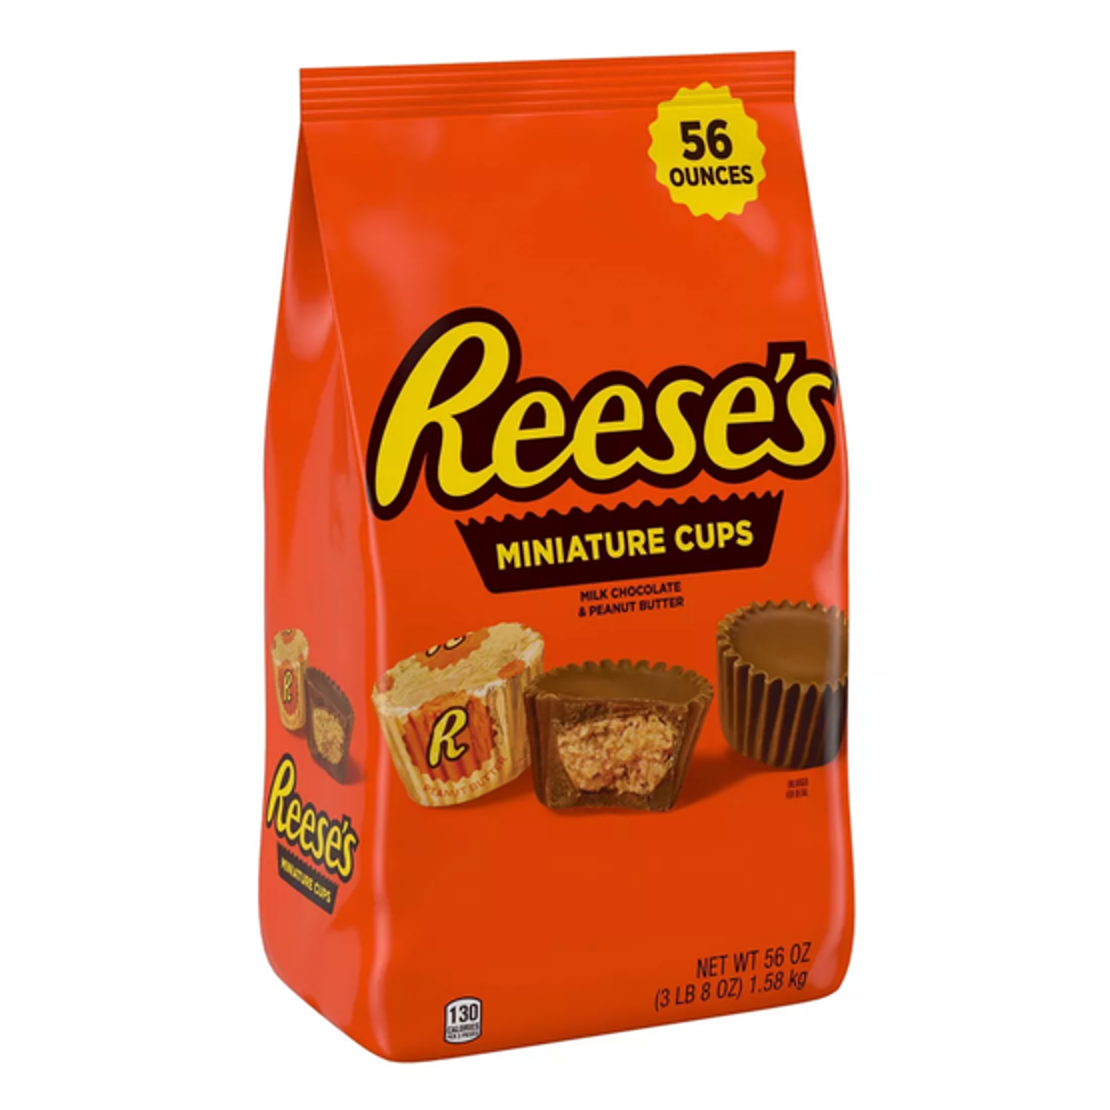 Reese’s 1kg  